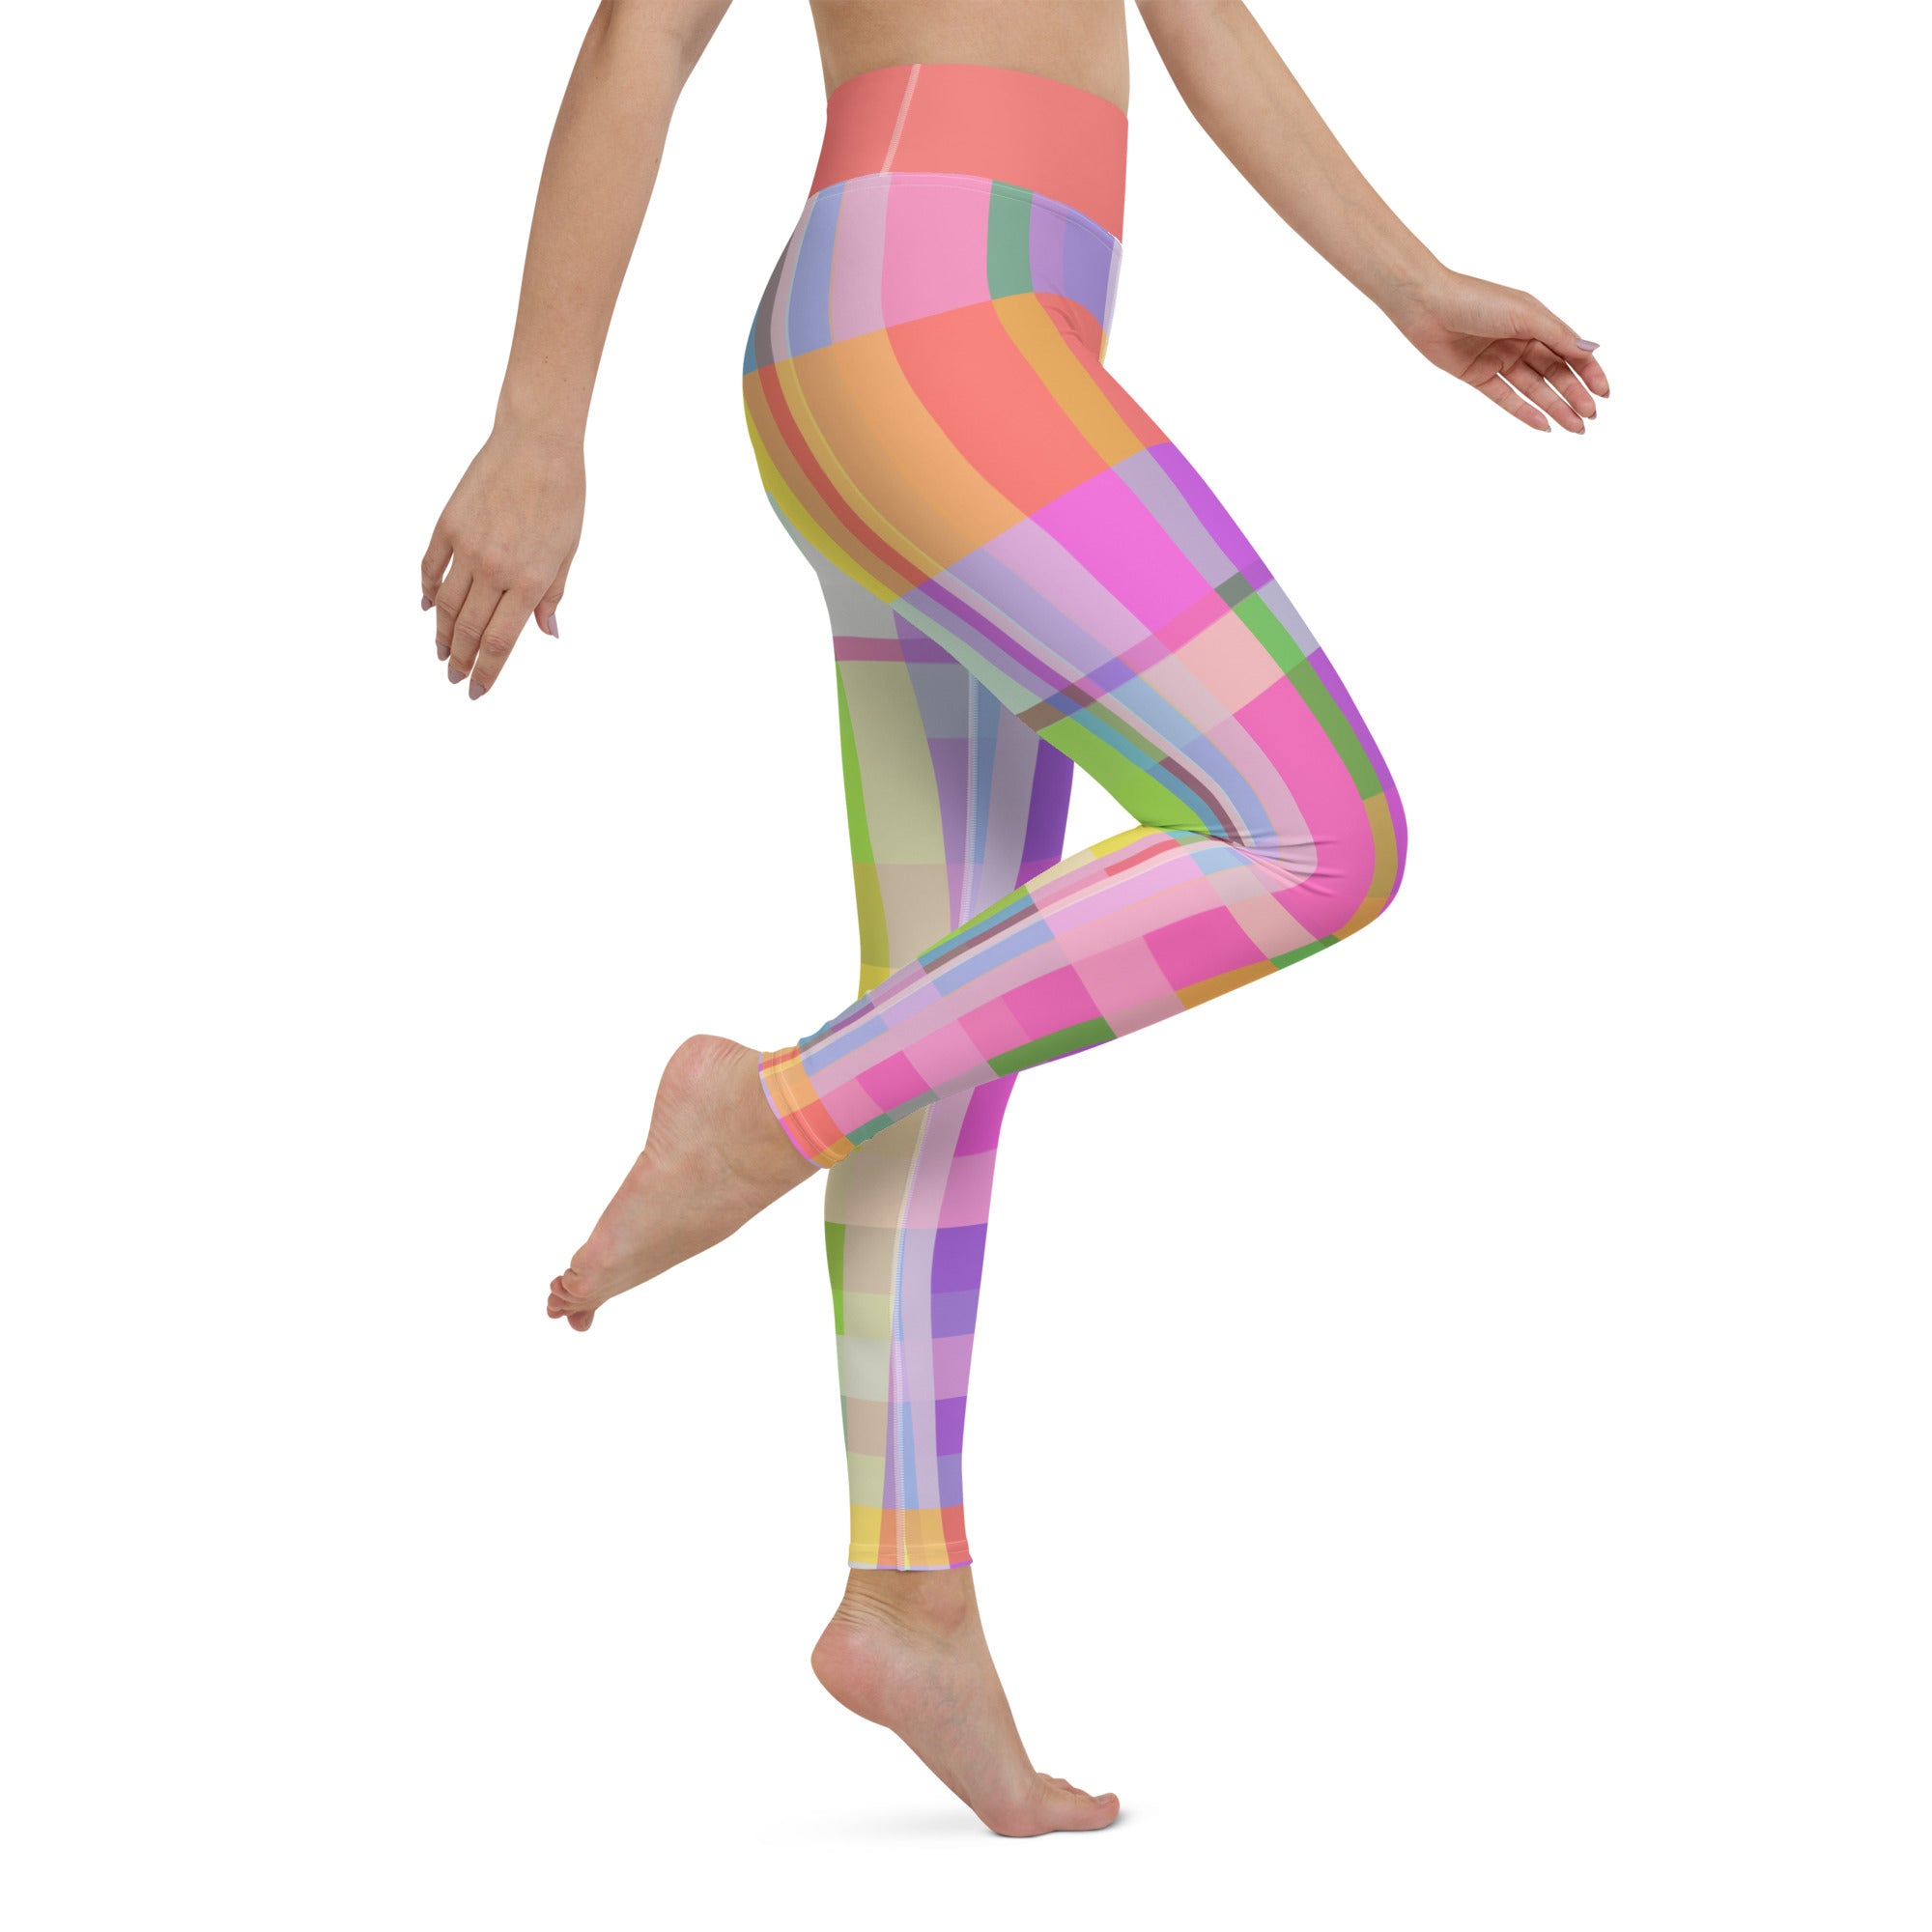 High-performance leggings designed with a colorful geometric maze, offering flexibility for all yoga poses.